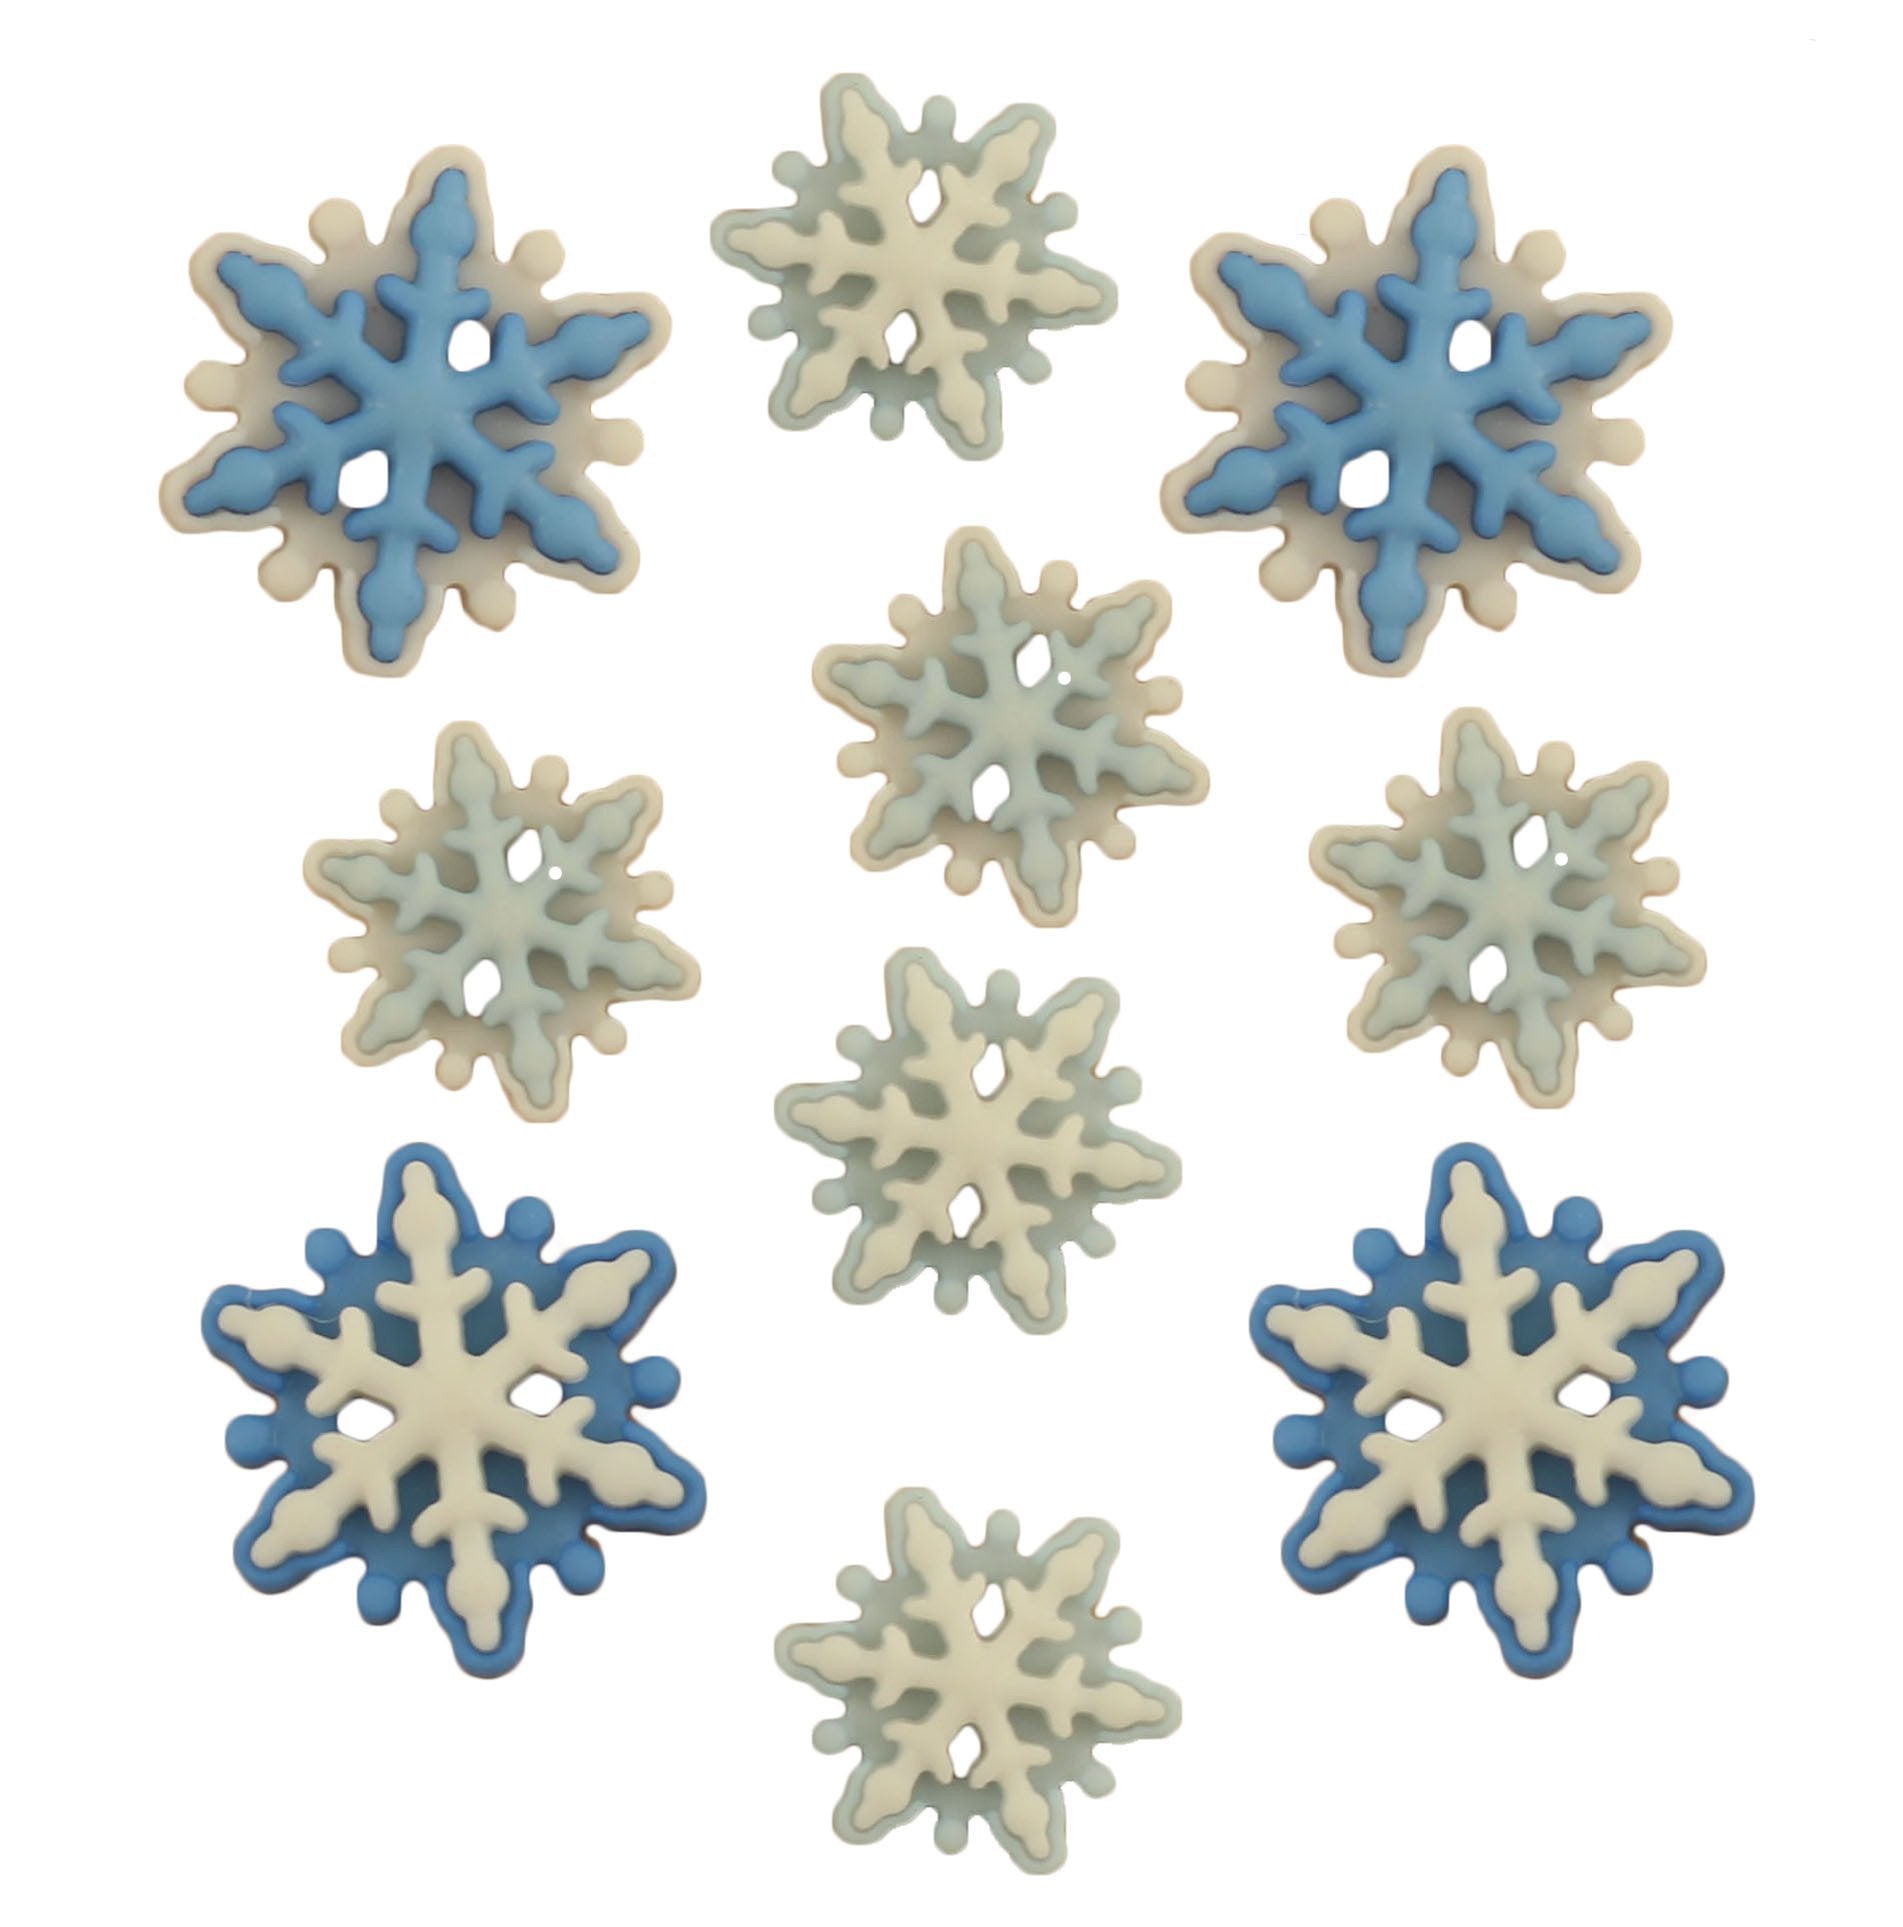 Frosty Flakes / Glitter Snowflake Sew-Thru Buttons / Buttons